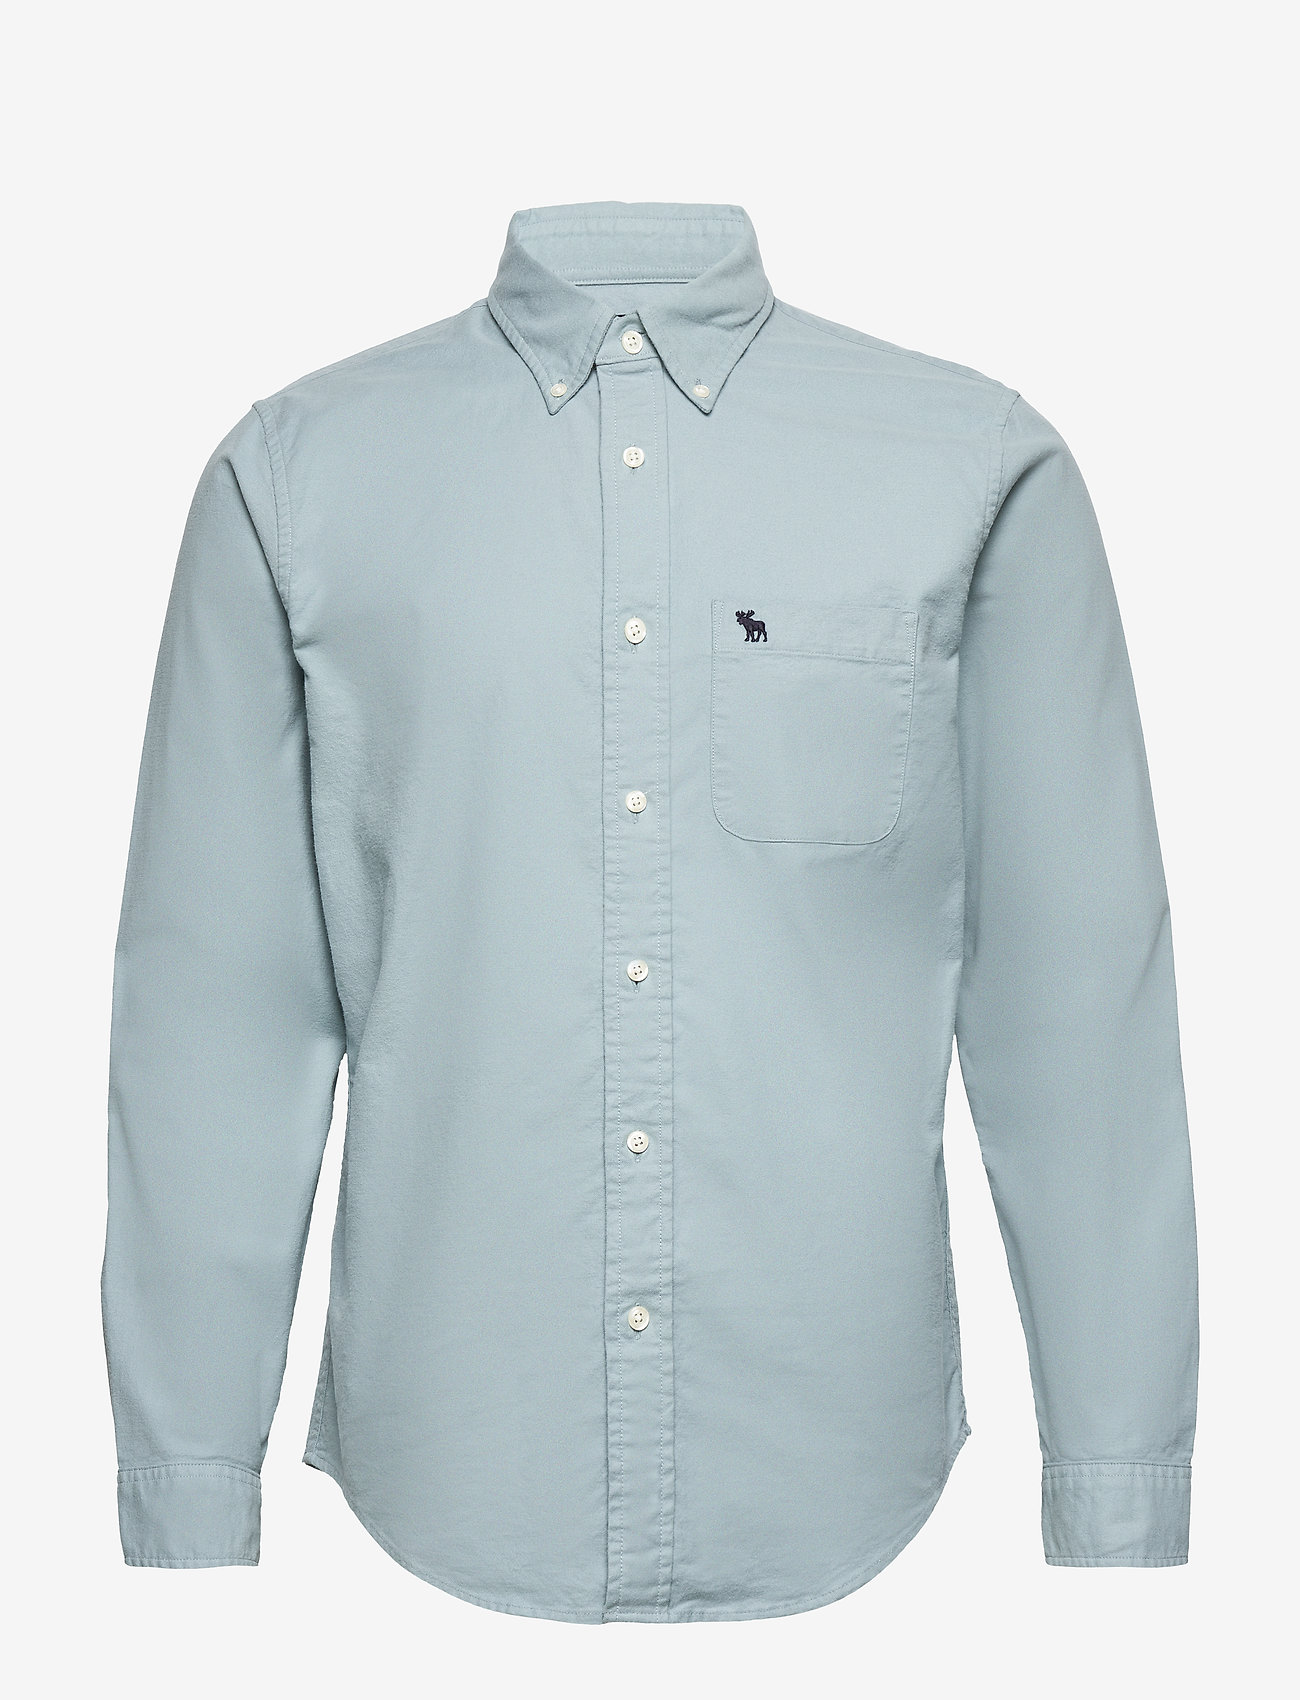 abercrombie fitch button up shirt